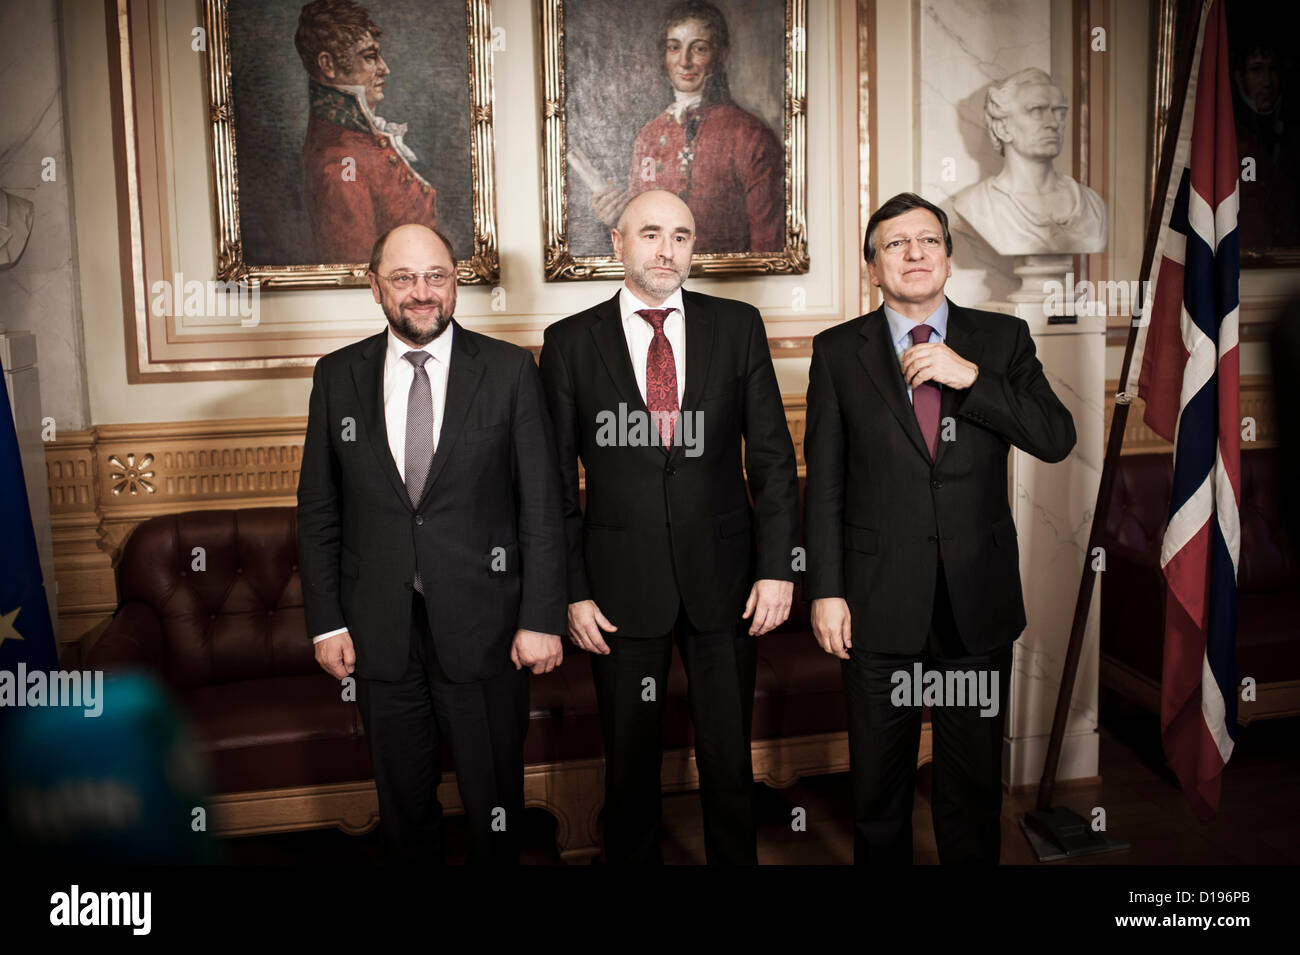 Oslo, Norway. 11/12/2012. Nobel Peace Prize winner Martin Schulz  and Jose Manuel Barrosa meets the press at the Norwegian Parliament along with president of the storting Dag Terje Andersen. Credit:  Alexander Widding / Alamy Live News Stock Photo